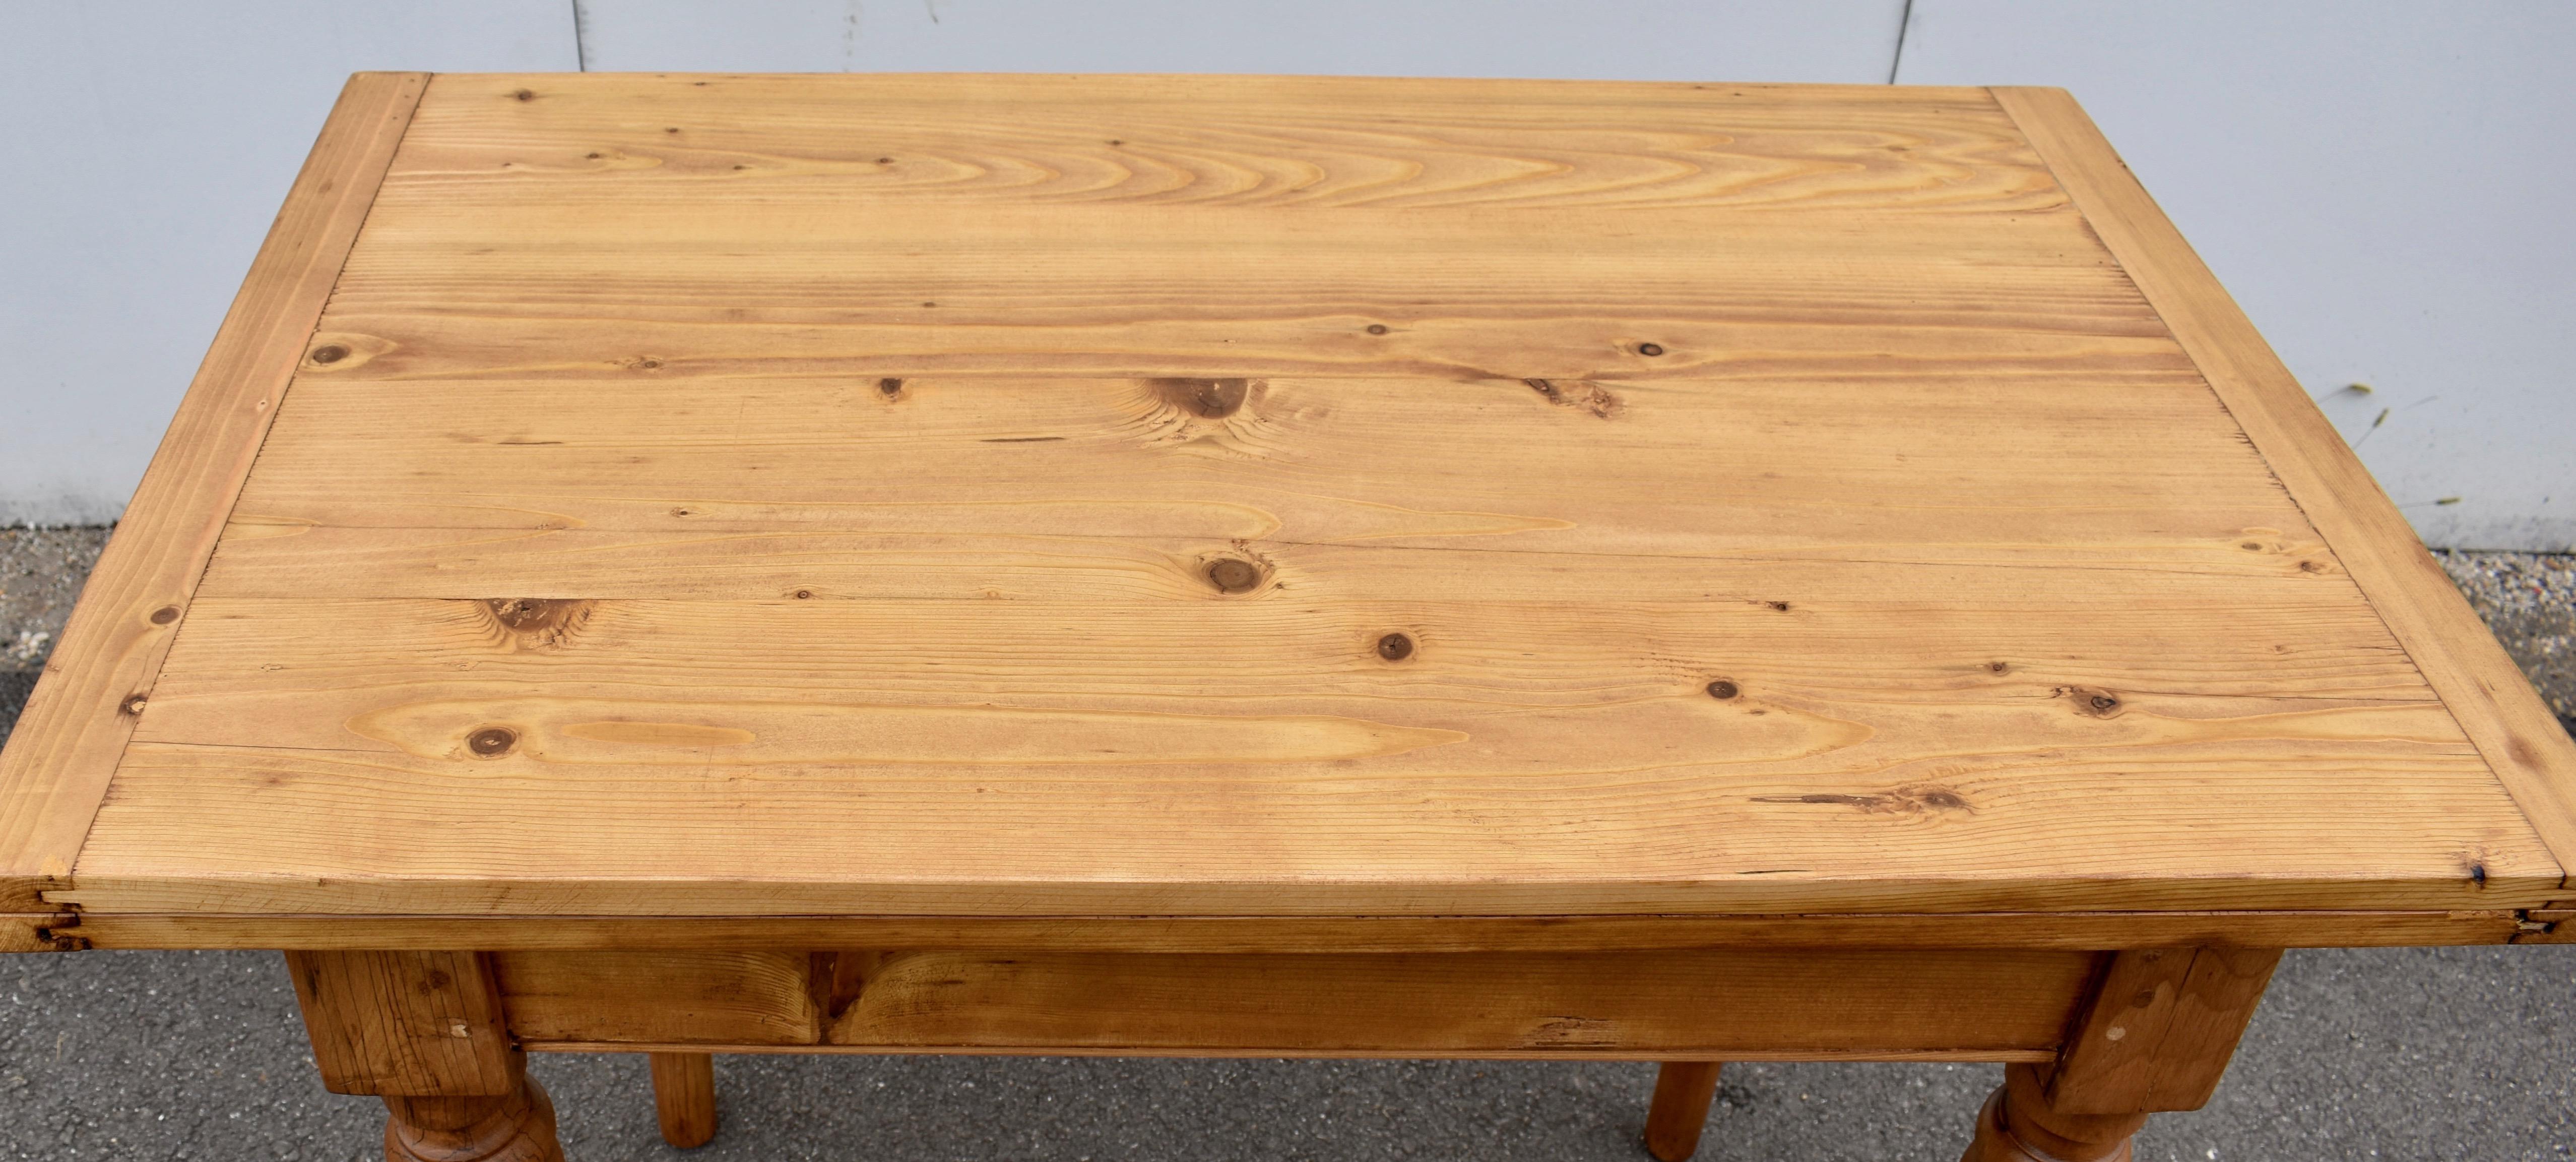 20th Century Pine Turned Leg Swivel-Top Table For Sale